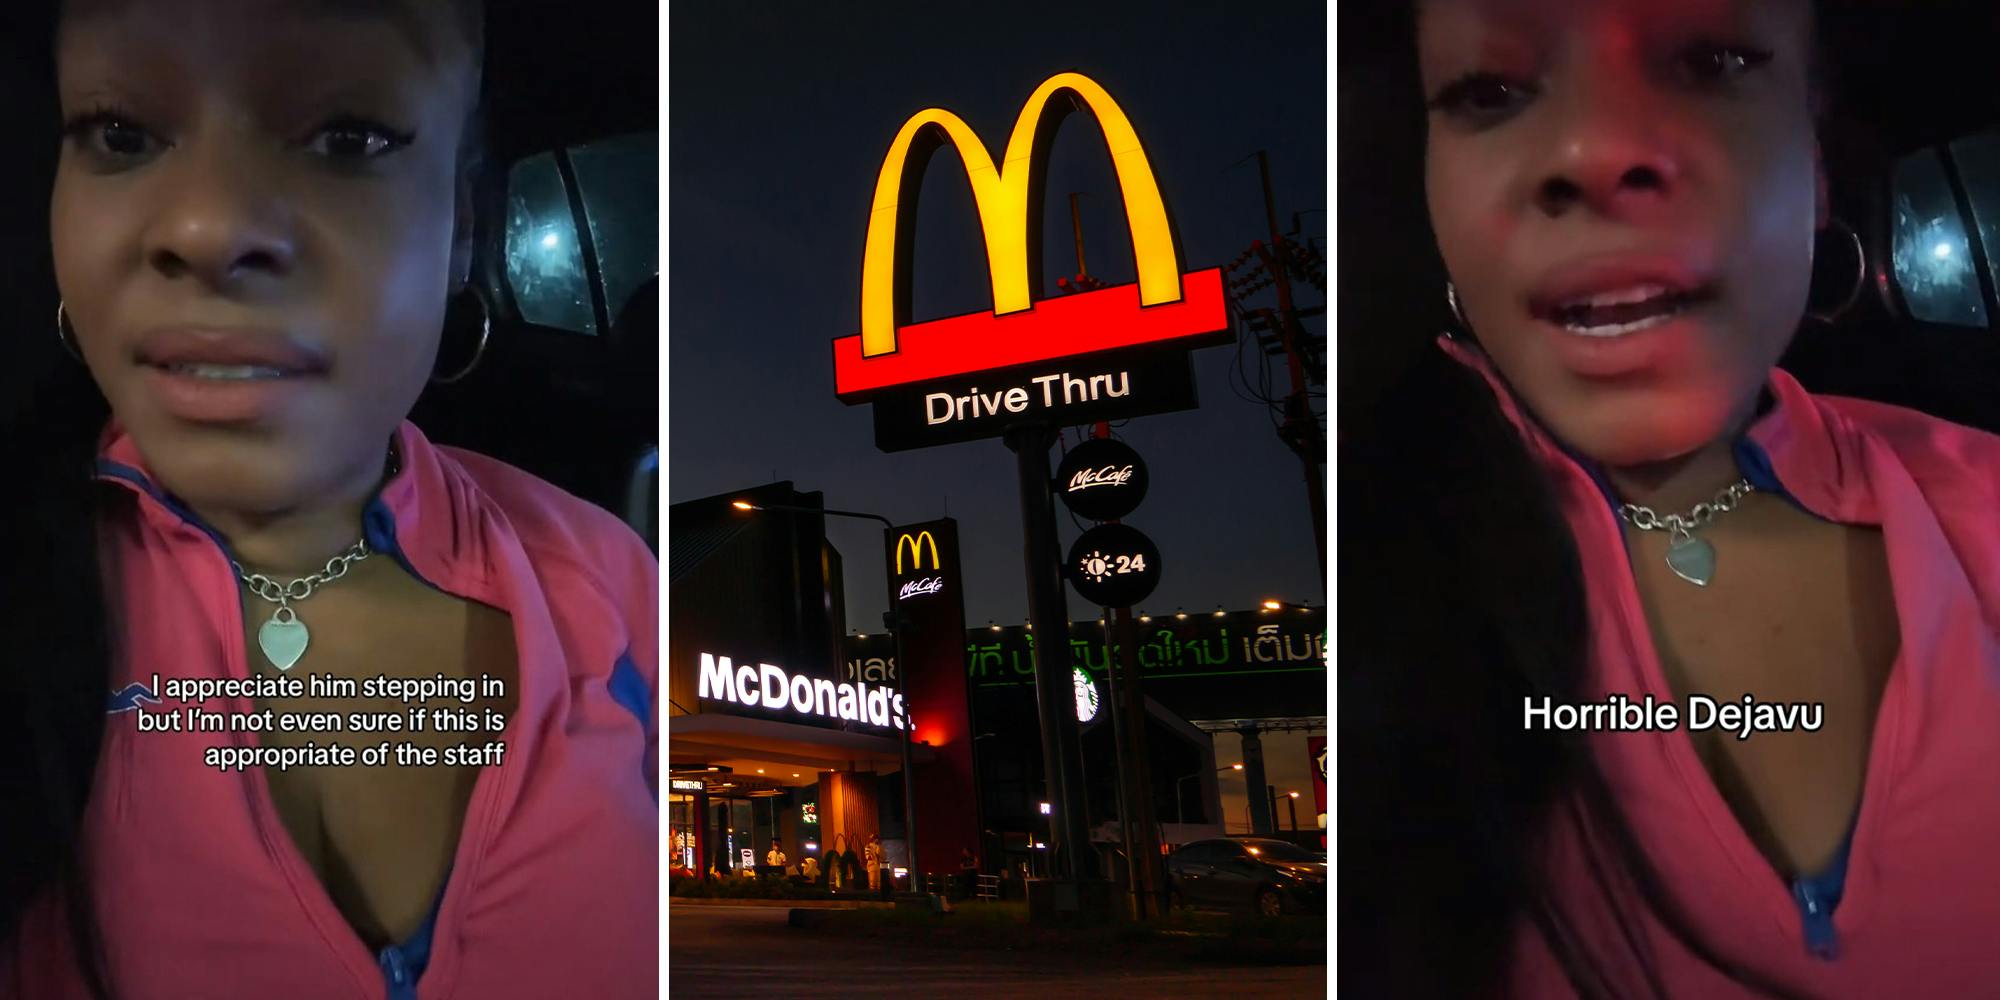 Customer says McDonald's workers ignored her while she was sitting in the drive-thru